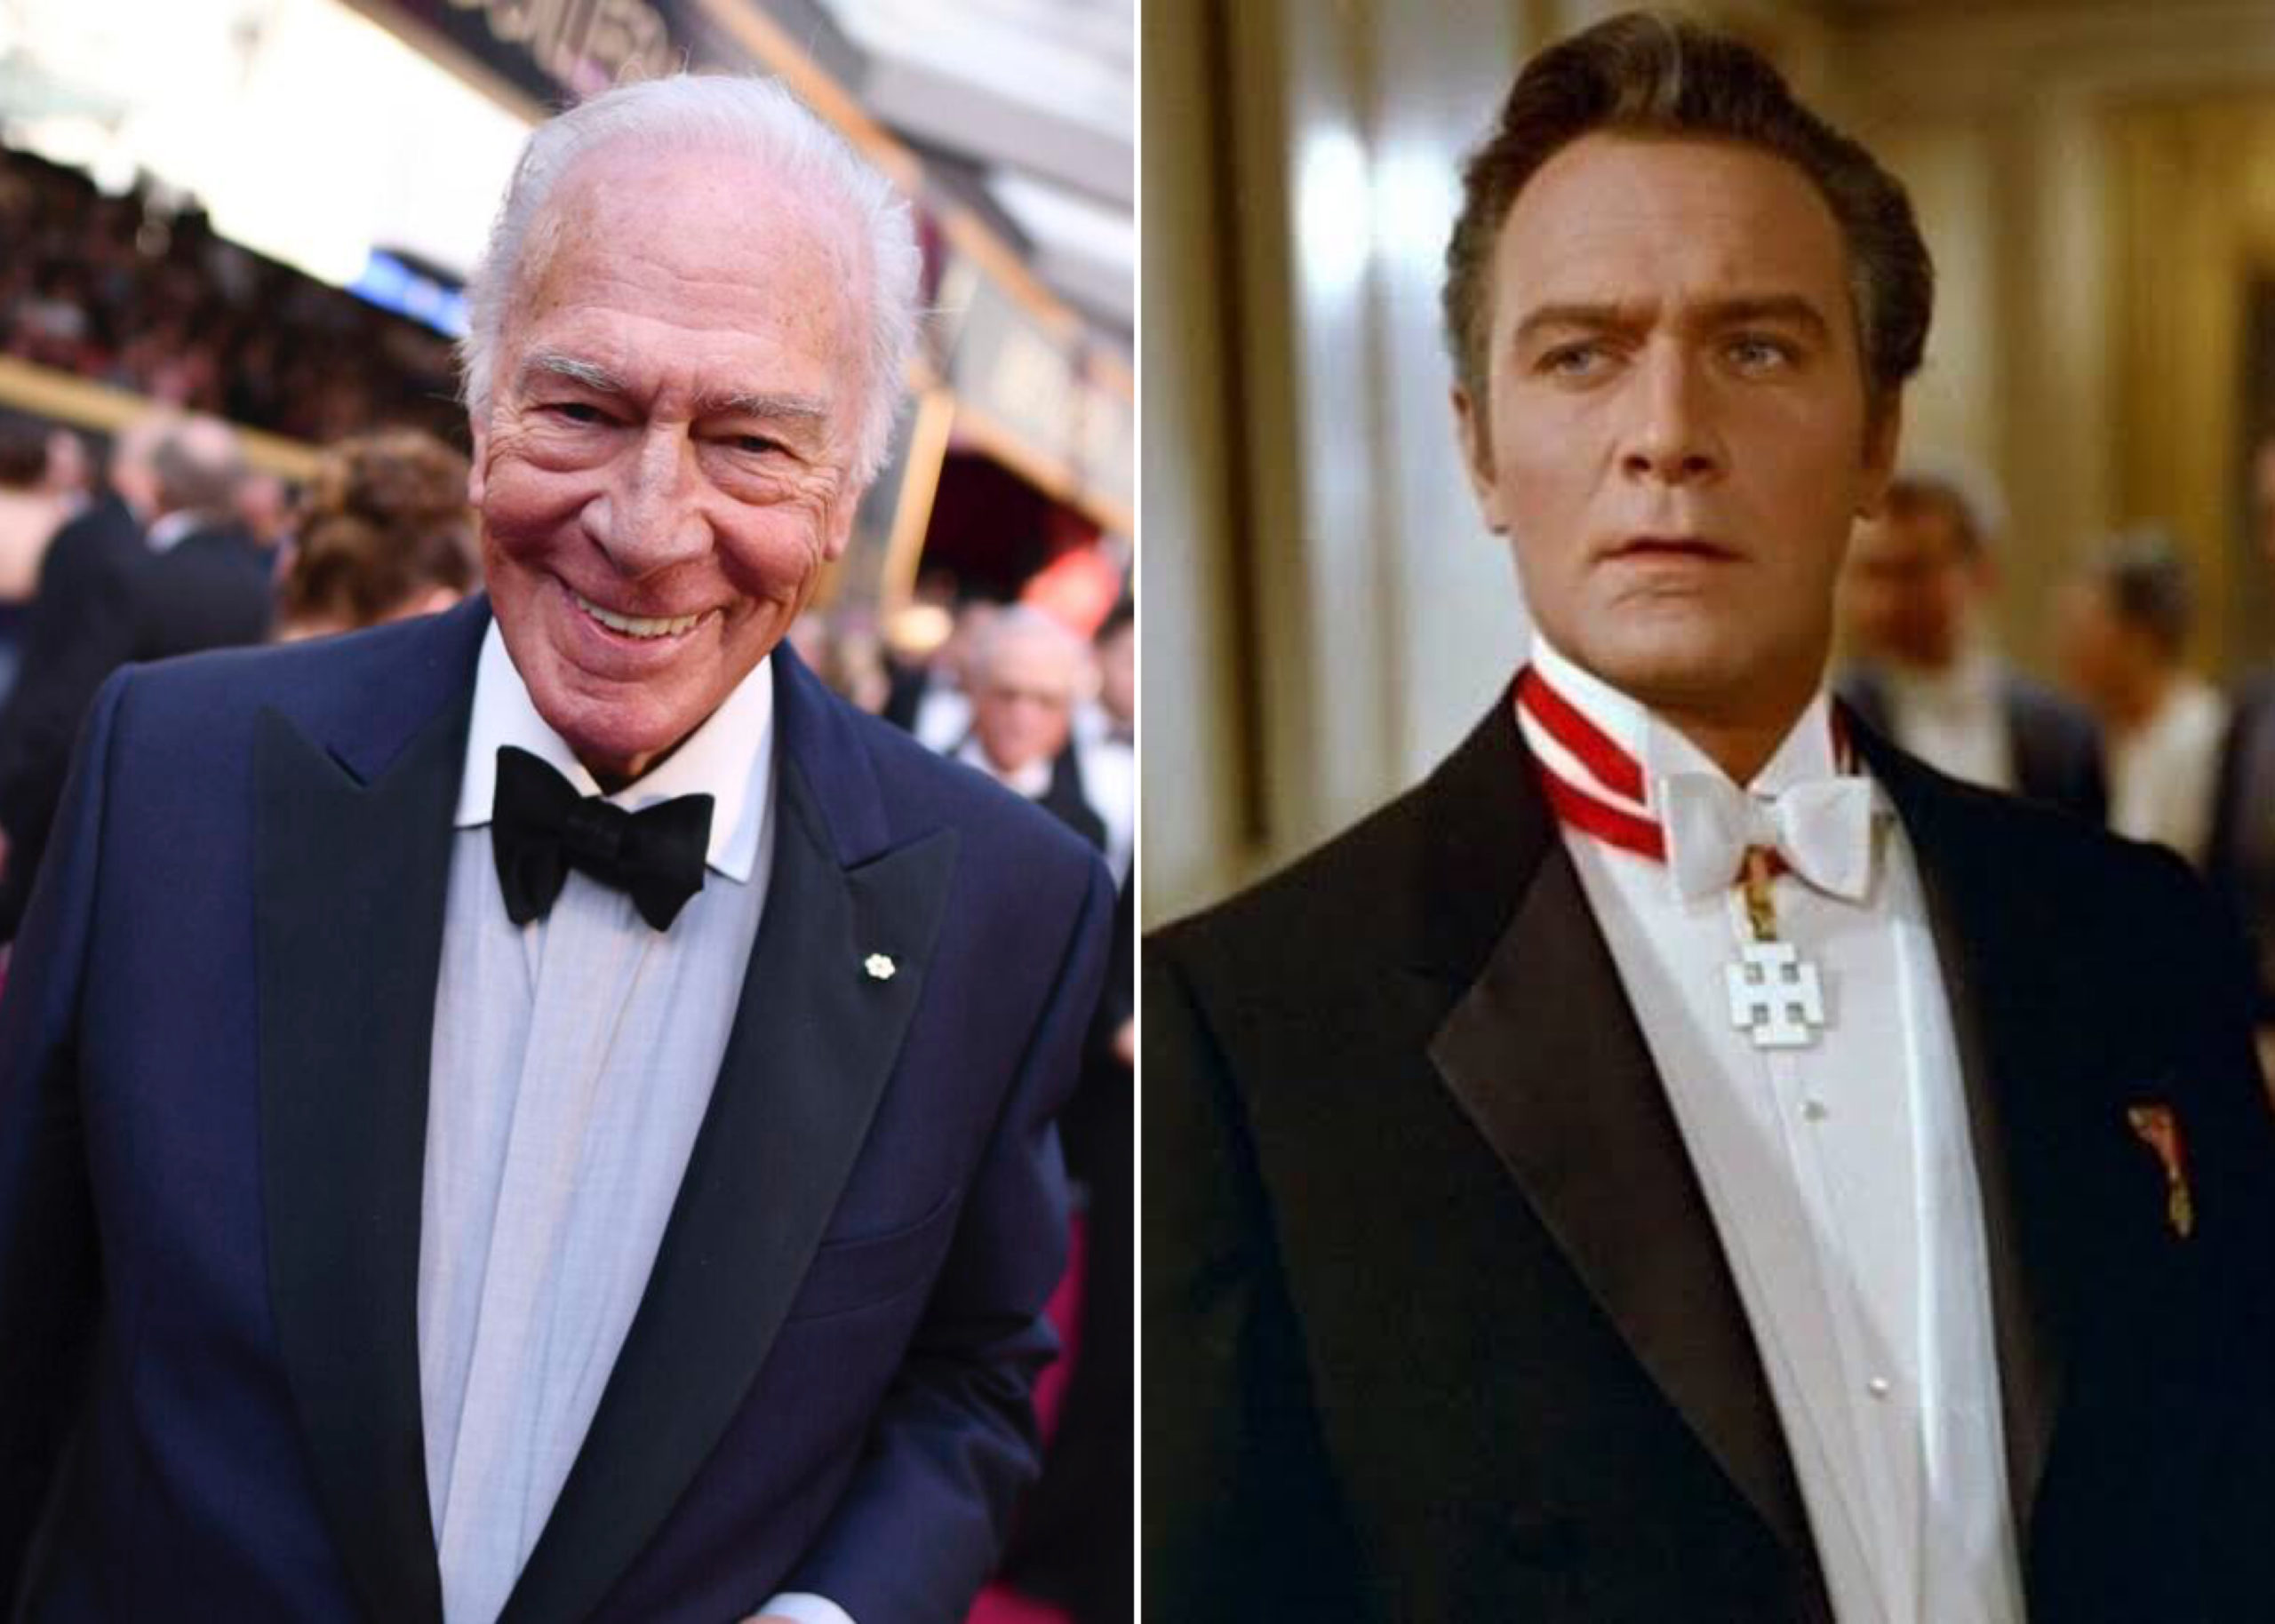 Christopher Plummer, 'The Sound Of Music' Actor, Dies at 91